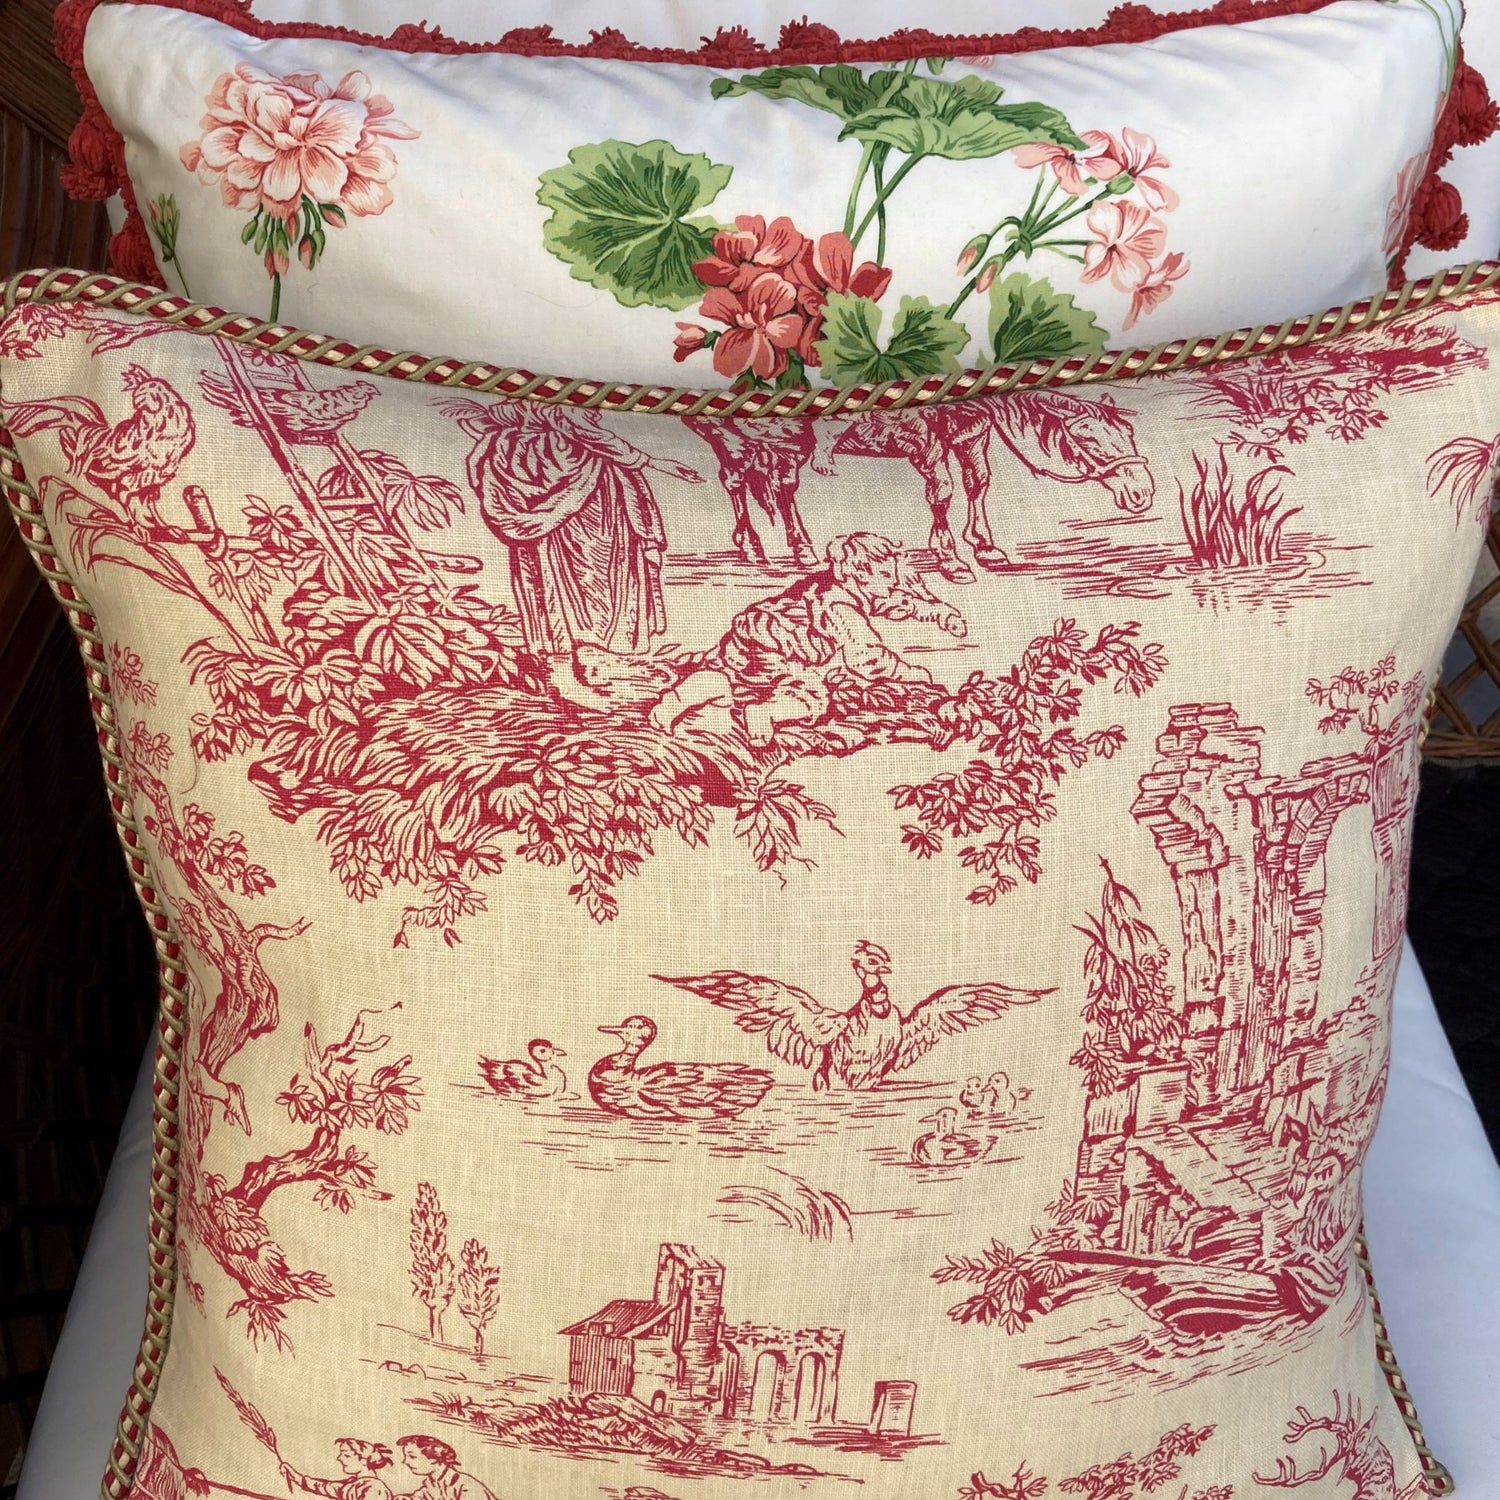 Country Life Hand Printed Red Toile 20x20 Square Pillow on Chair